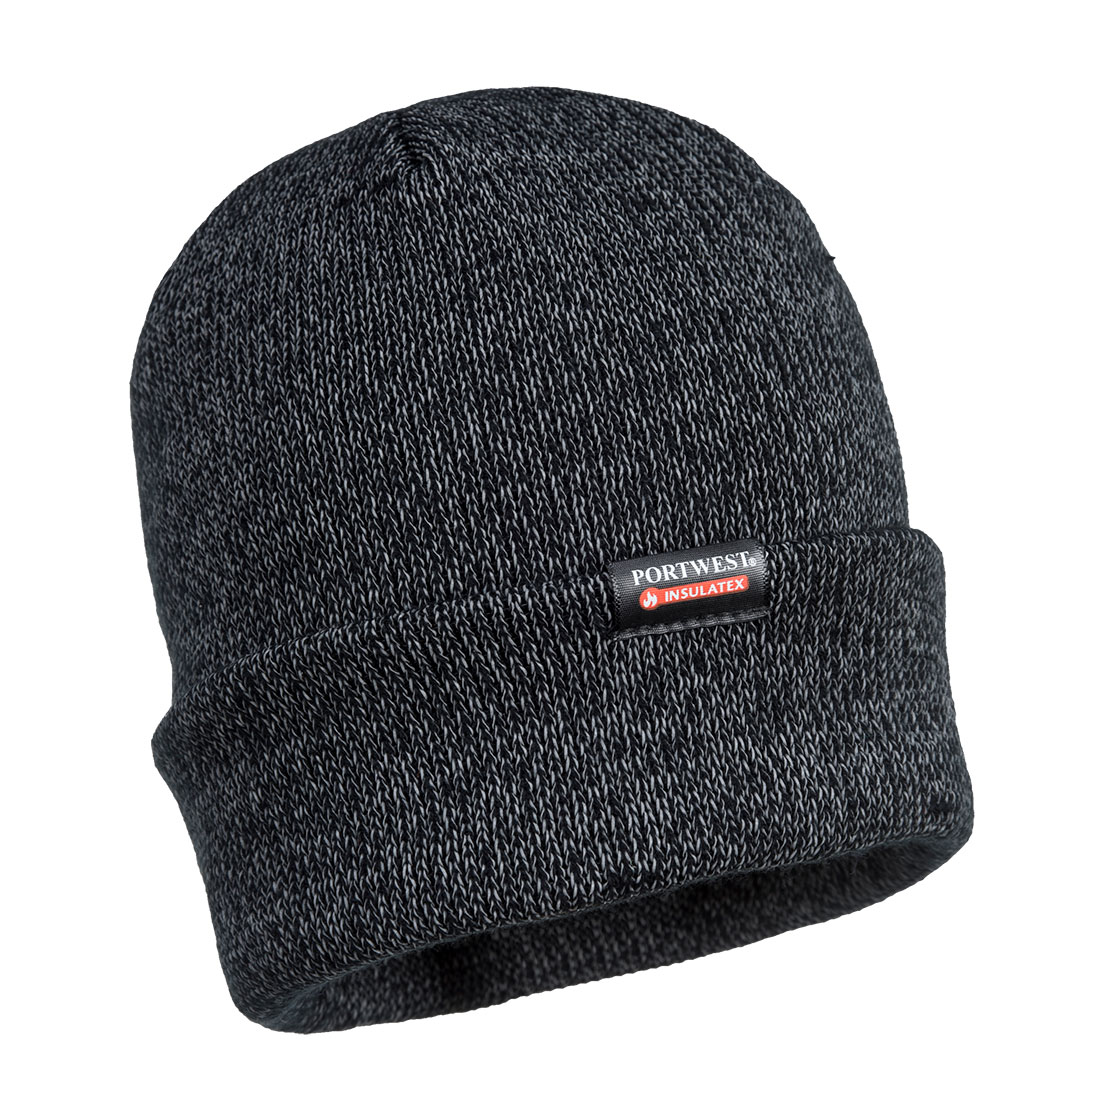 Reflective Knit Hat, Insulatex Lined - Black